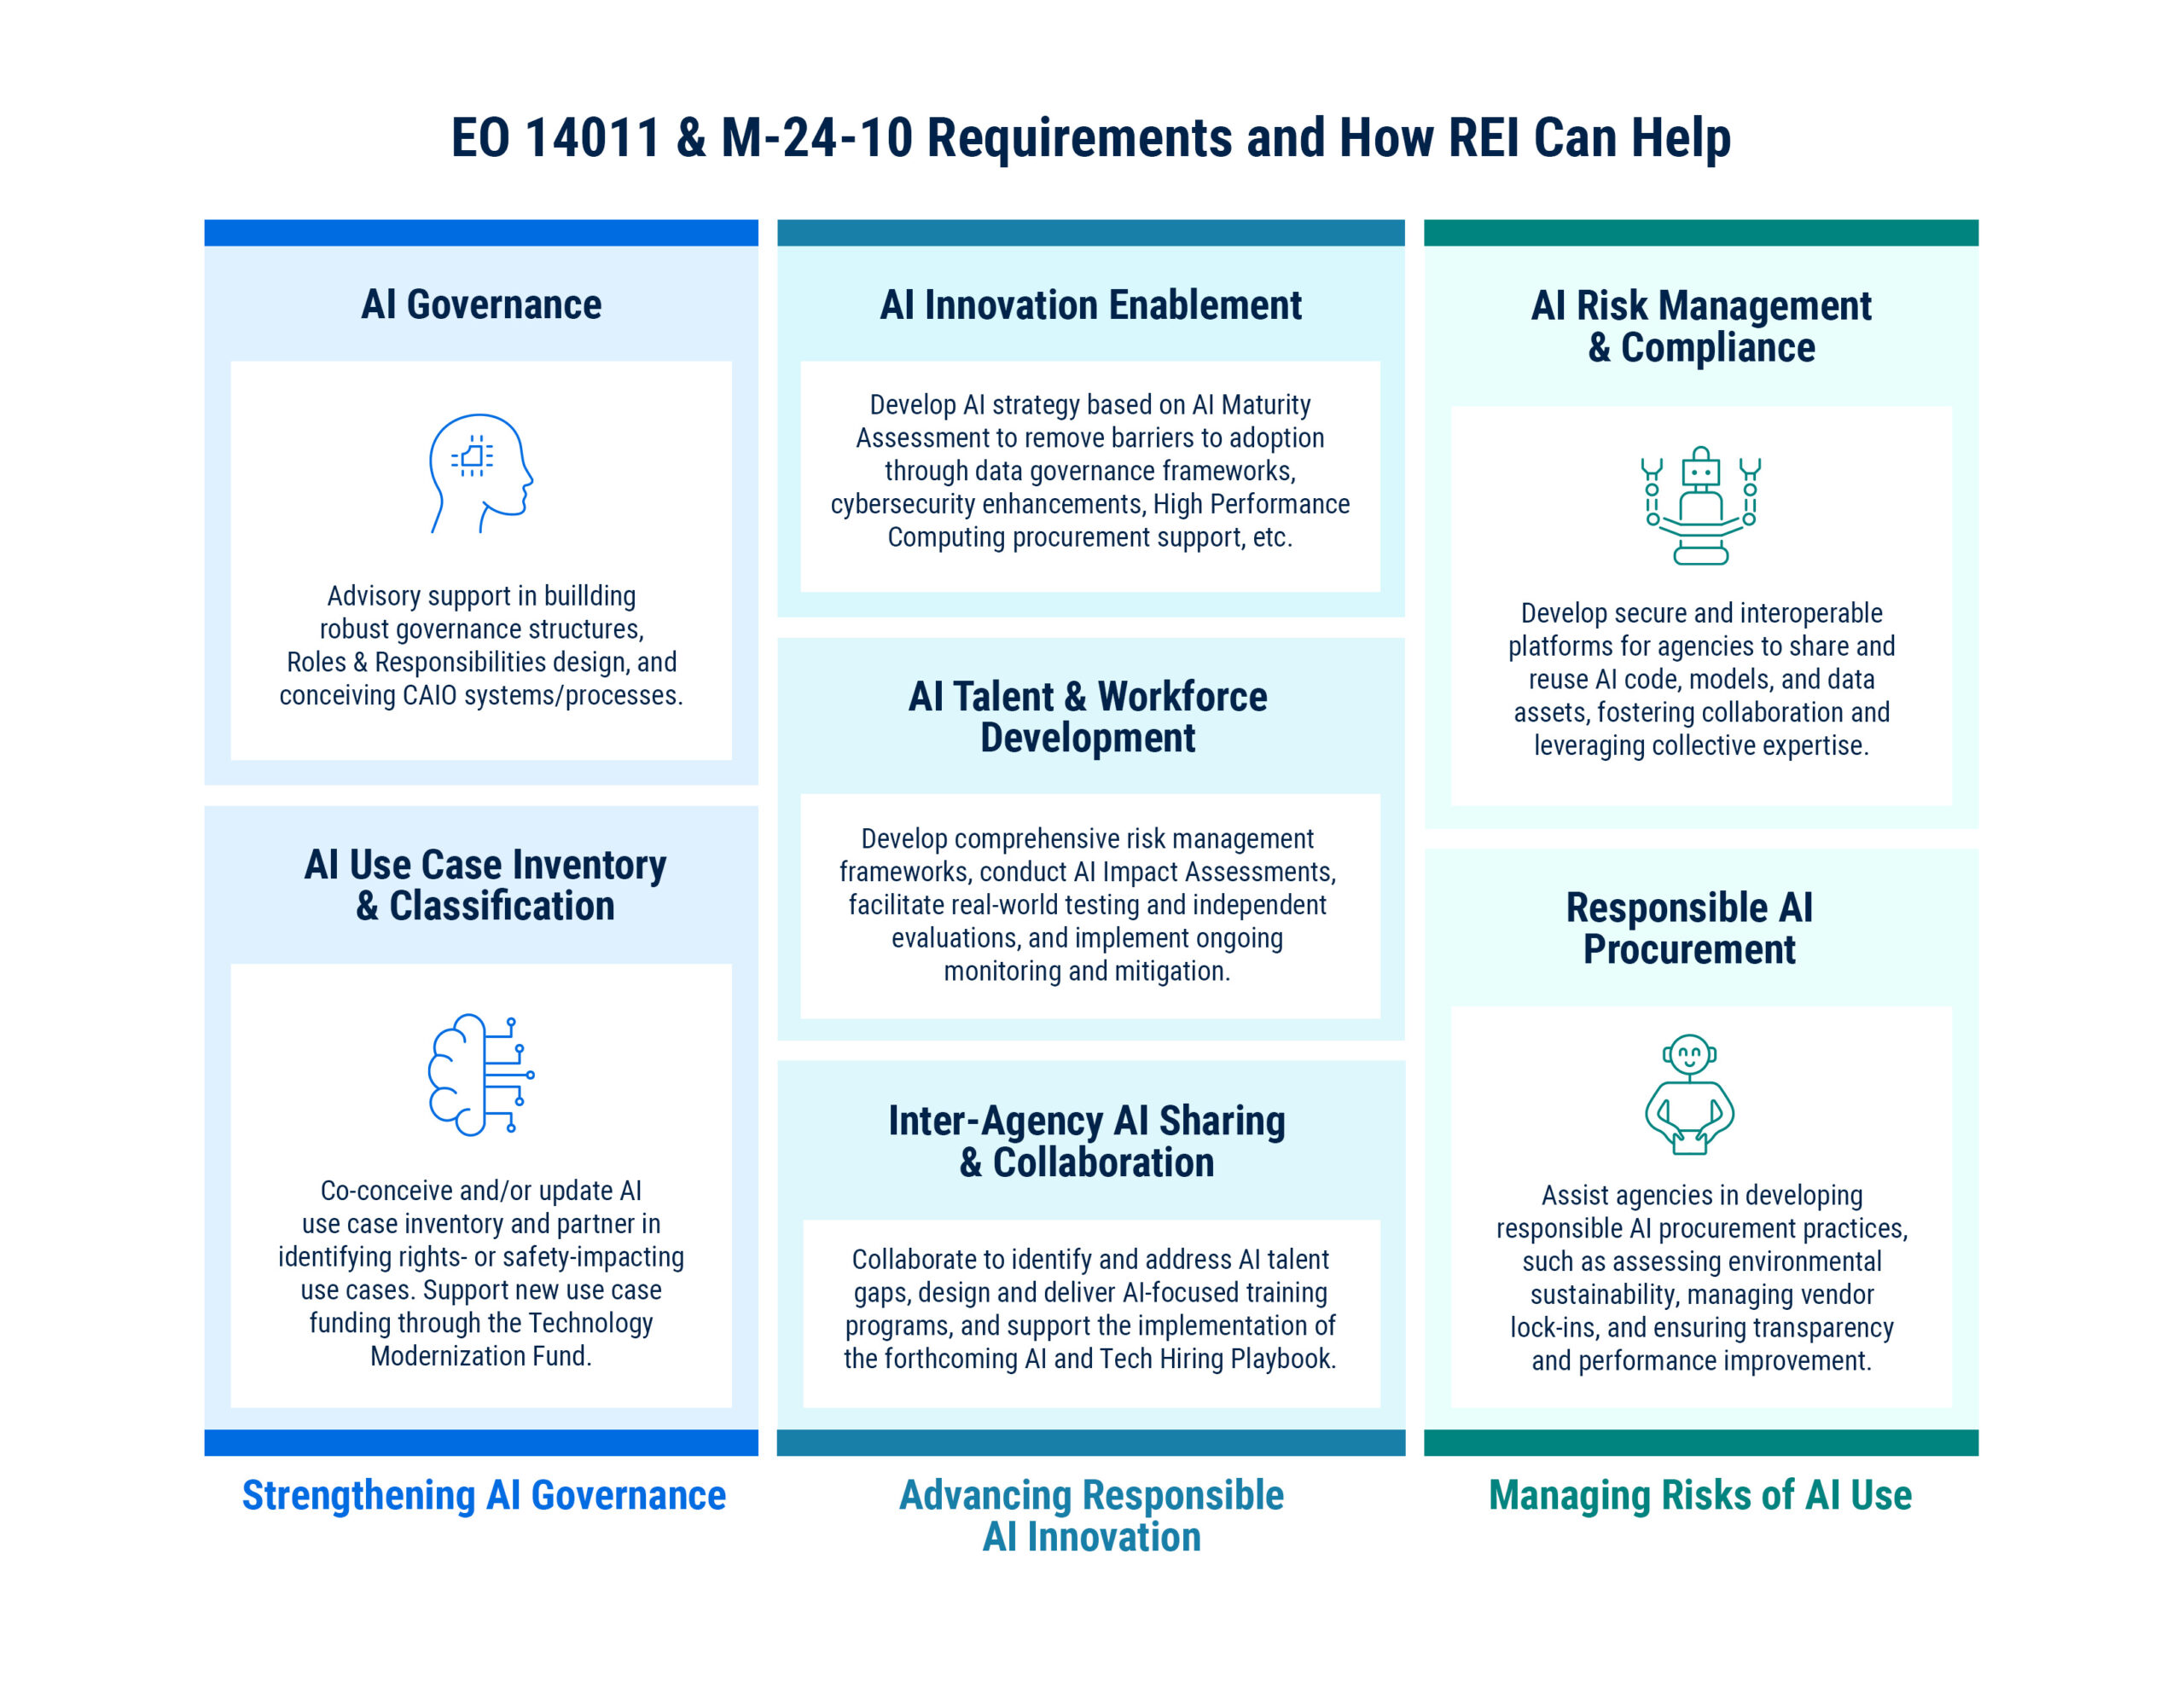 EO 14011 & M-24-10 Requirements and How REI Can Help. Table showing 3 columns with text. 1) Strengthening Ai Governance: AI Governance; AI Use Case Inventory & Classification. 2) Advancing Responsible Ai Innovatiion: AI Innovation Enablement; AI Talent & Workforce Development; Inter-Agency AI Sharing & Collaboration. 3) Managing Risks of Ai Use: AI Risk Management & Compliance; Responsible AI Procurement